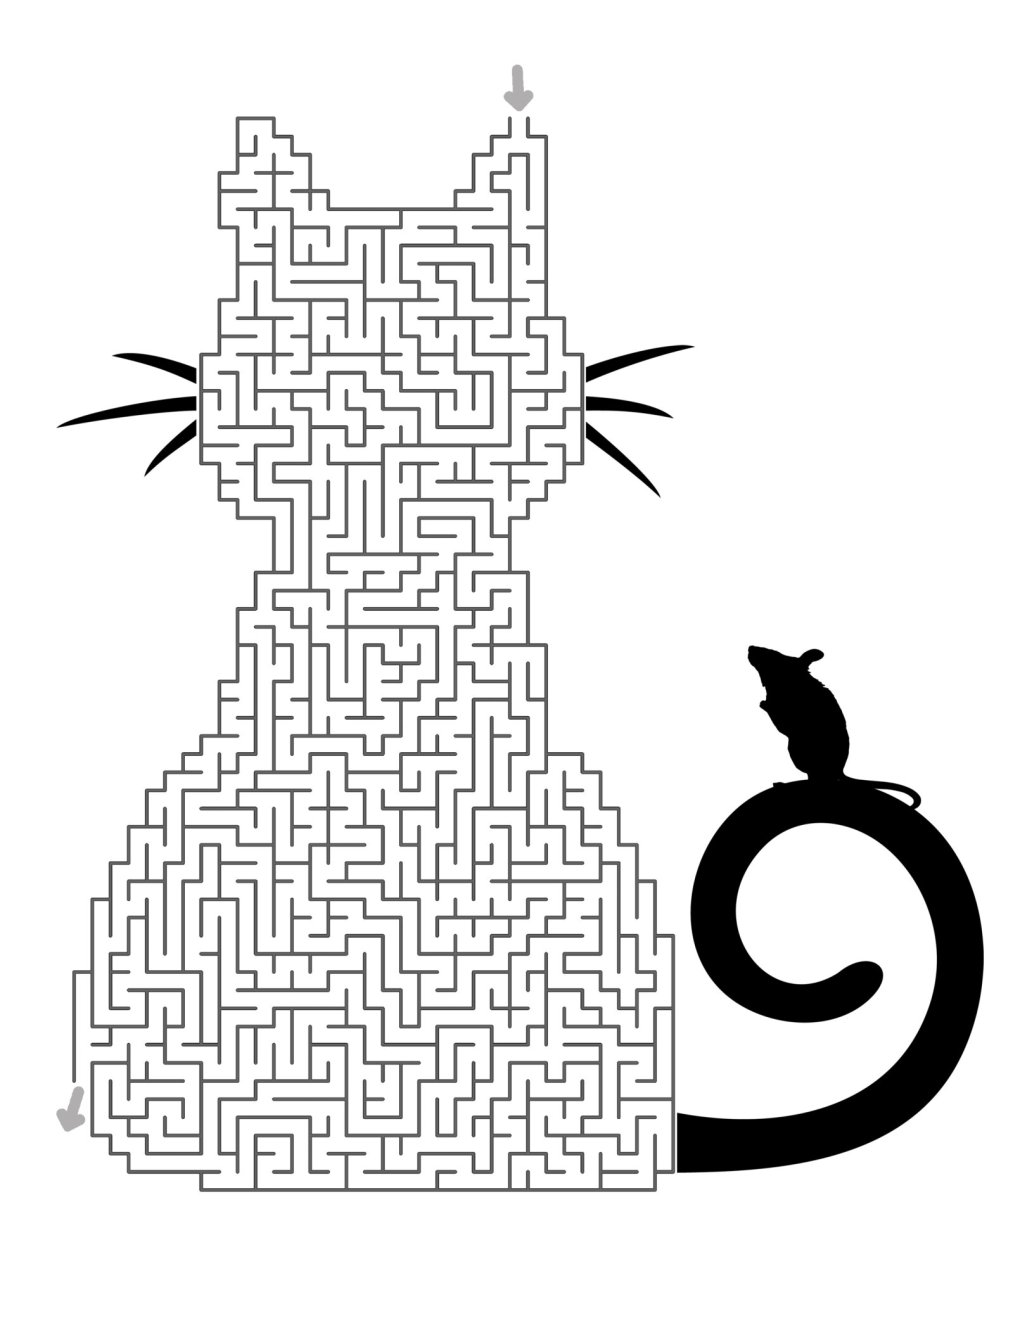 Weekly Cat Puzzle – The Cat Maze!